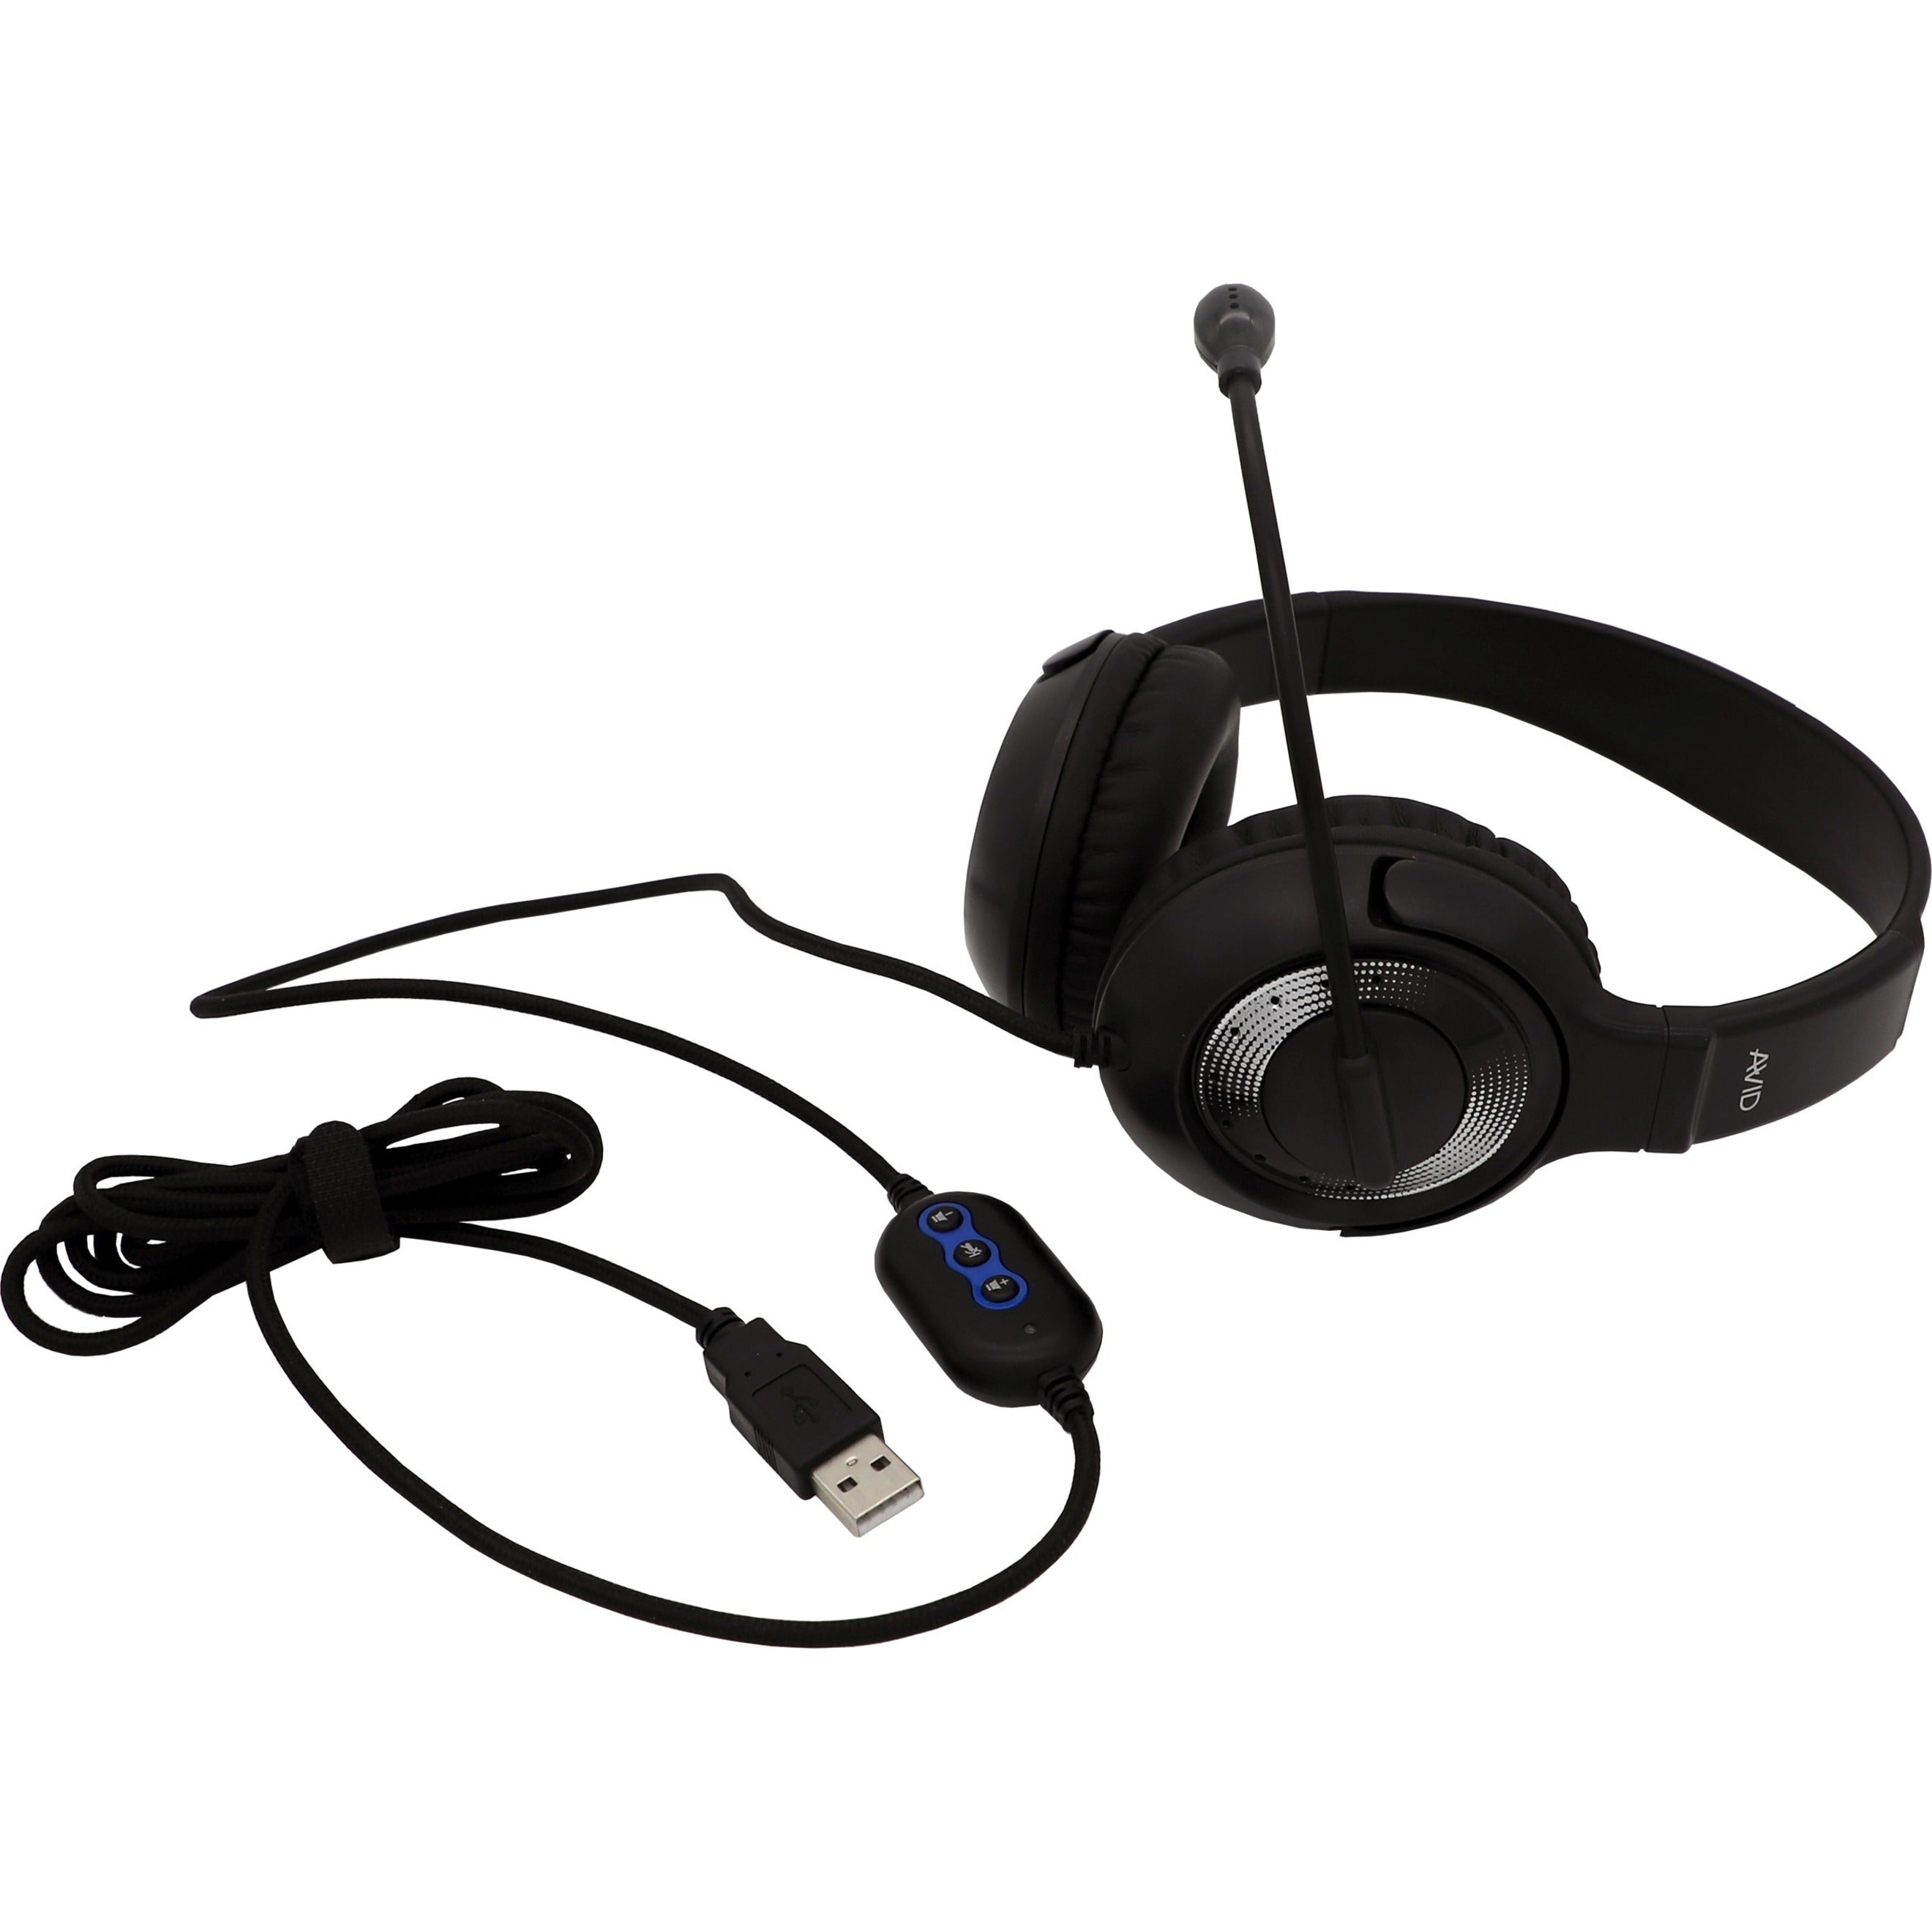 Avid Education 2AE55KLUSB AE-55 Headset USB Wired Stereo Headset with Noise Cancelling Microphone